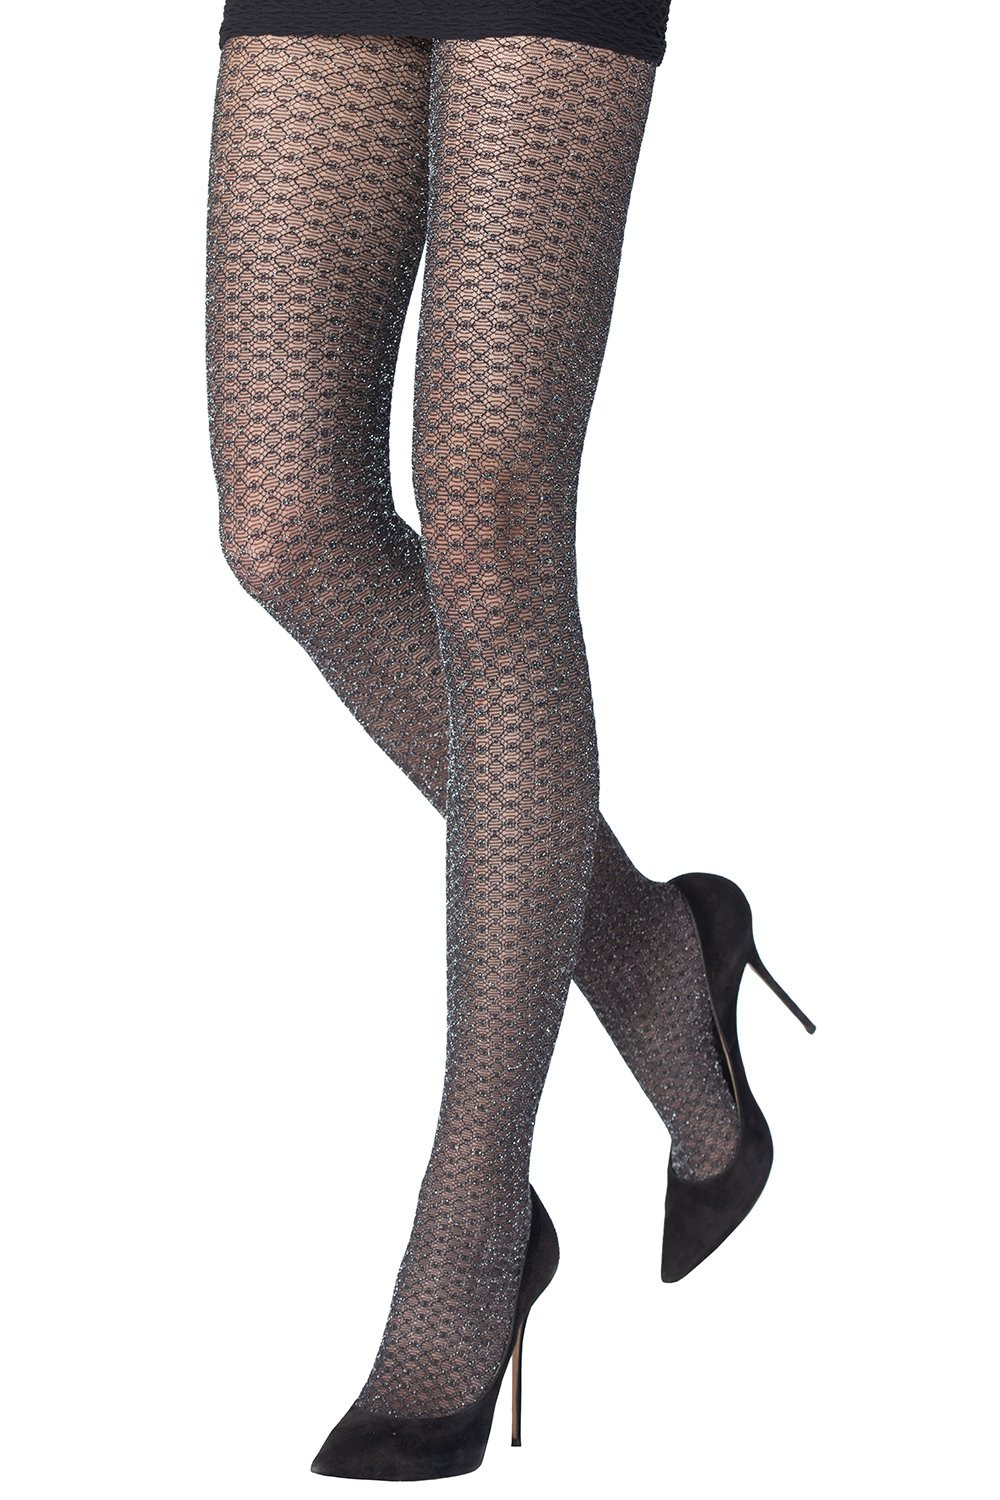 METALLIZED BEEHIVE TIGHTS